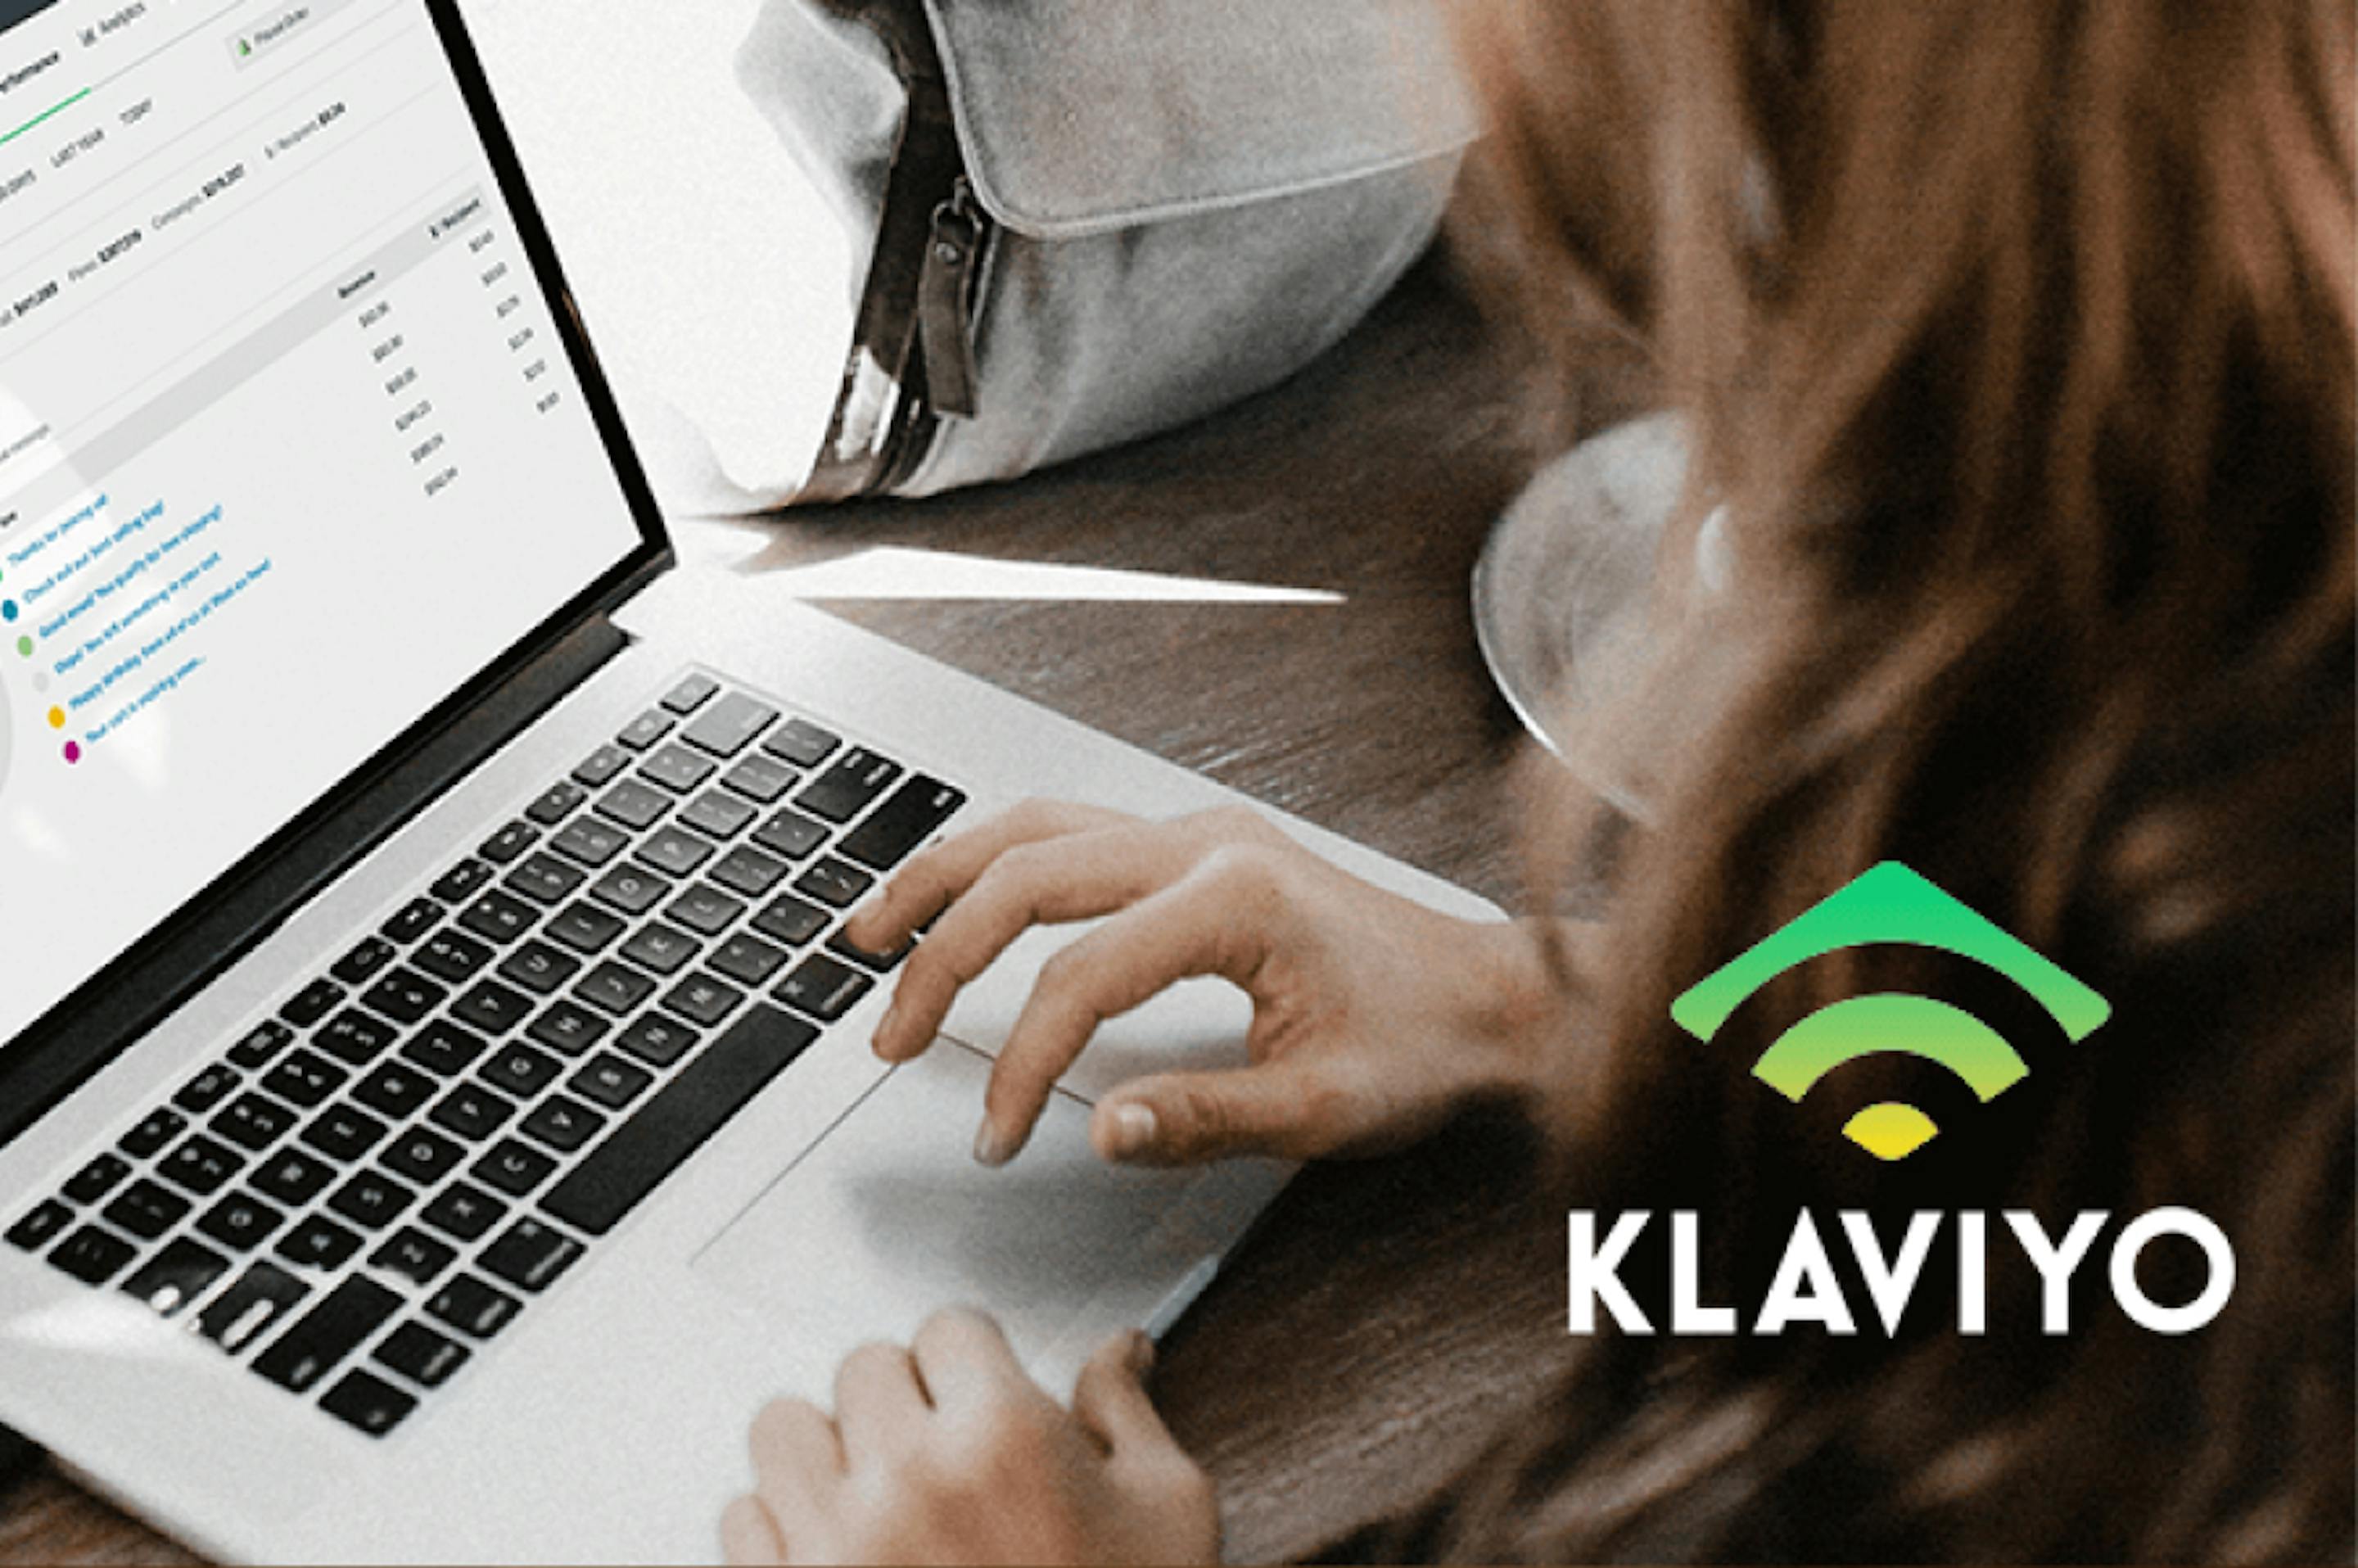 Person typing on a laptop with a Klaviyo logo in the corner